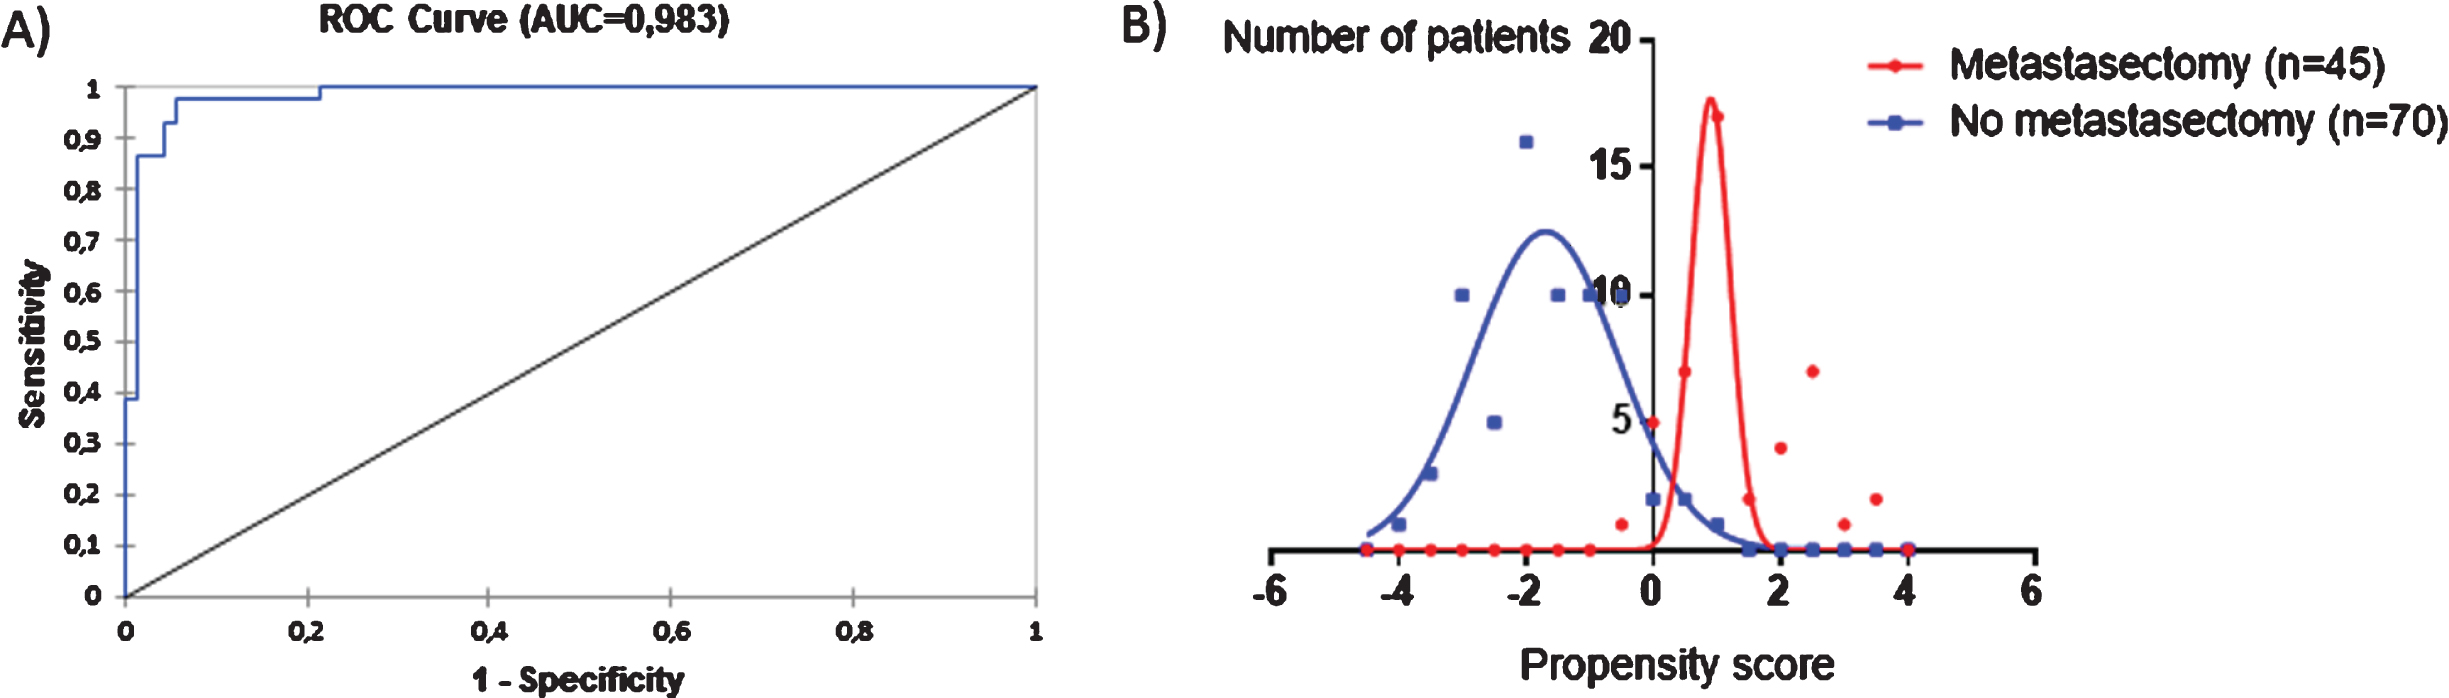 Propensity model that estimates a patient’s probability to undergo metastasectomy. (A) over 98% of the probability is determined by baseline characteristics. (B) There is almost no overlap between the propensity scores of patients who undergo metastasectomy and those who do not. Therefore these populations cannot be compared. A more positive score indicates a higher probability to receive metastasectomy, a more negative score a lower probability. In case of missing data for one or more predictors in a patient, the known predictors were used in the multivariable logistic regression model calculating the AUC, but the patients’ propensity score was not calculated. The characteristics of patients who did not receive metastasectomy are shown in supplemental Table 1.